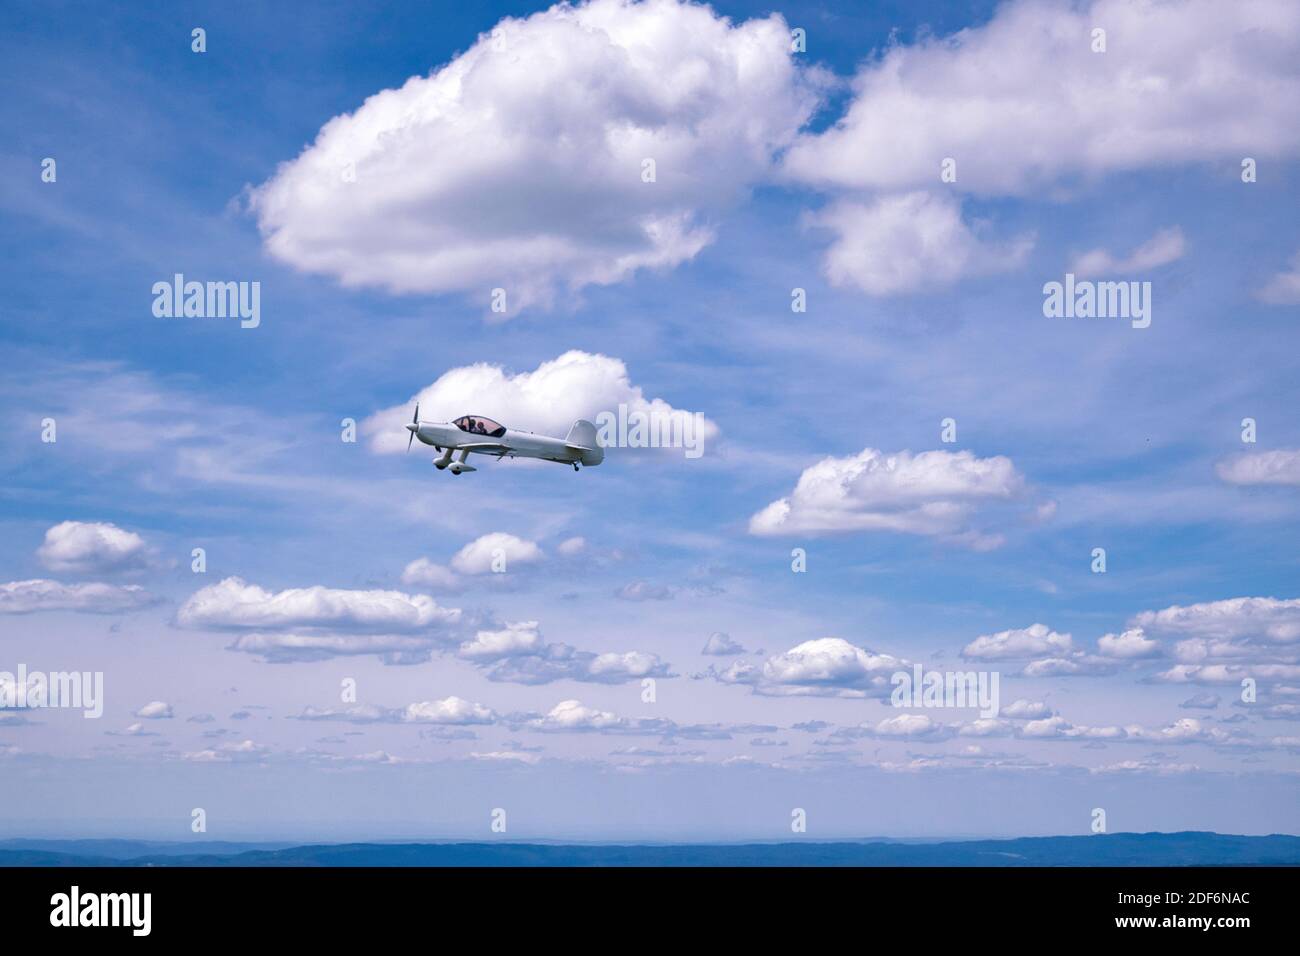 Small trainer aircraft flying in air, amidst the clouds. Horizontal view. Negative space, good for writing text. Suitable for background, cover photo. Stock Photo